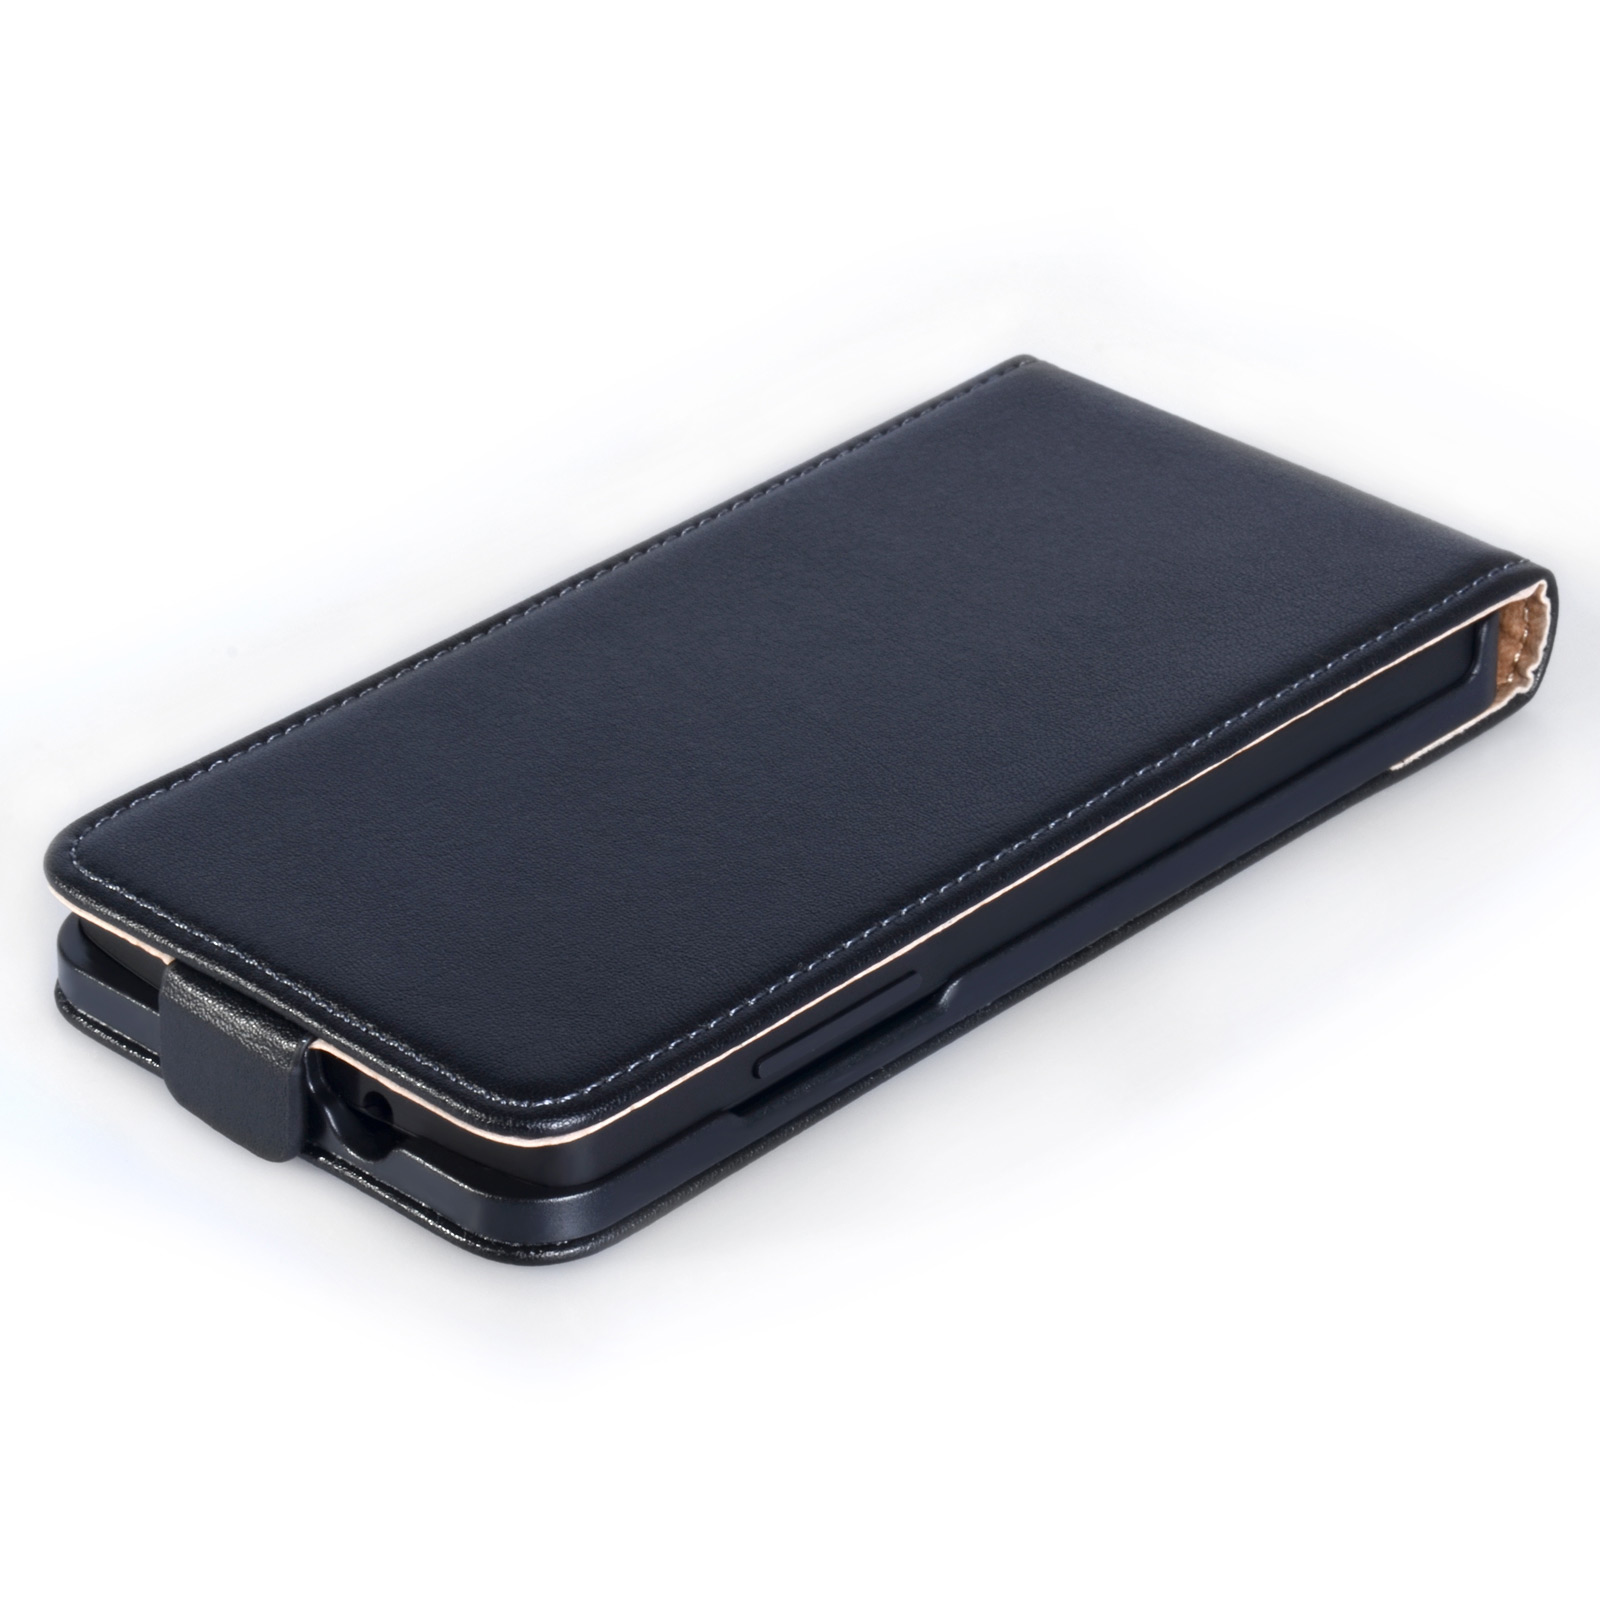 YouSave Accessories Nexus 5 Real Leather Flip Case - Black